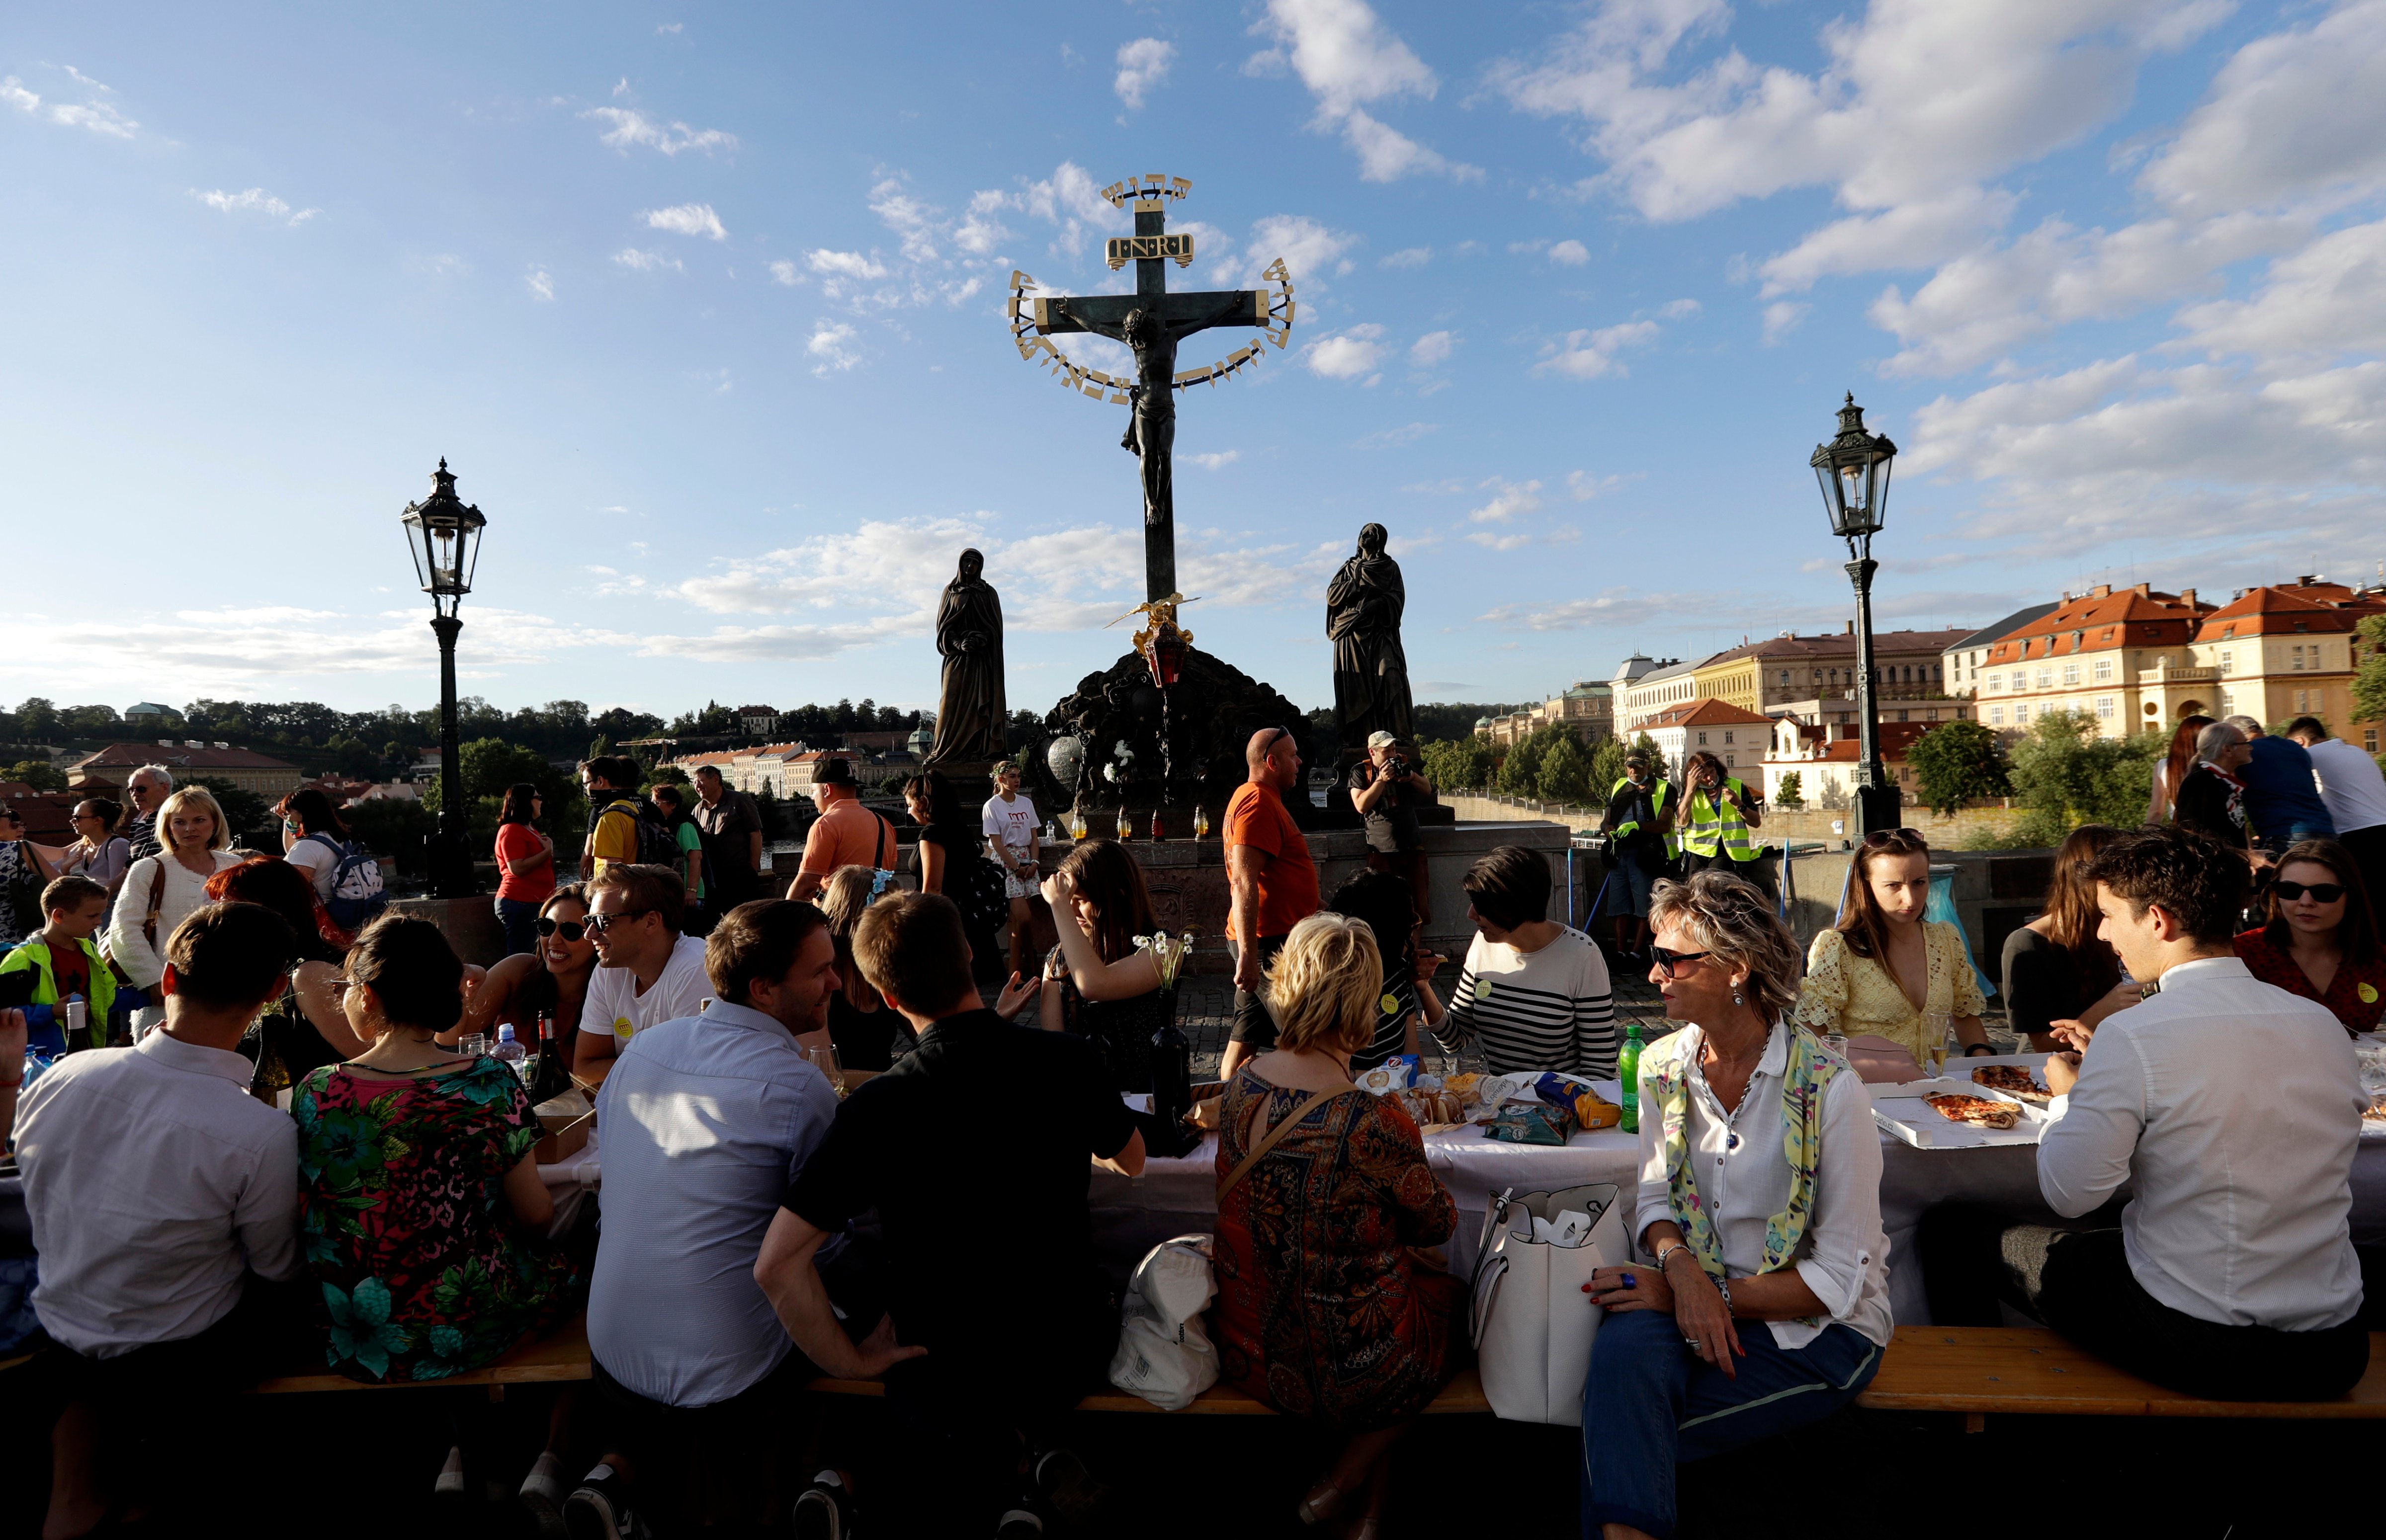 Residents sit to dine on a 500 meter long table set on the medieval Charles Bridge, after restrictions were eased following the coronavirus pandemic in Prague, Czech Republic, Tuesday, June 30, 2020. (Petr David Josek —AP Photo/Getty Images)